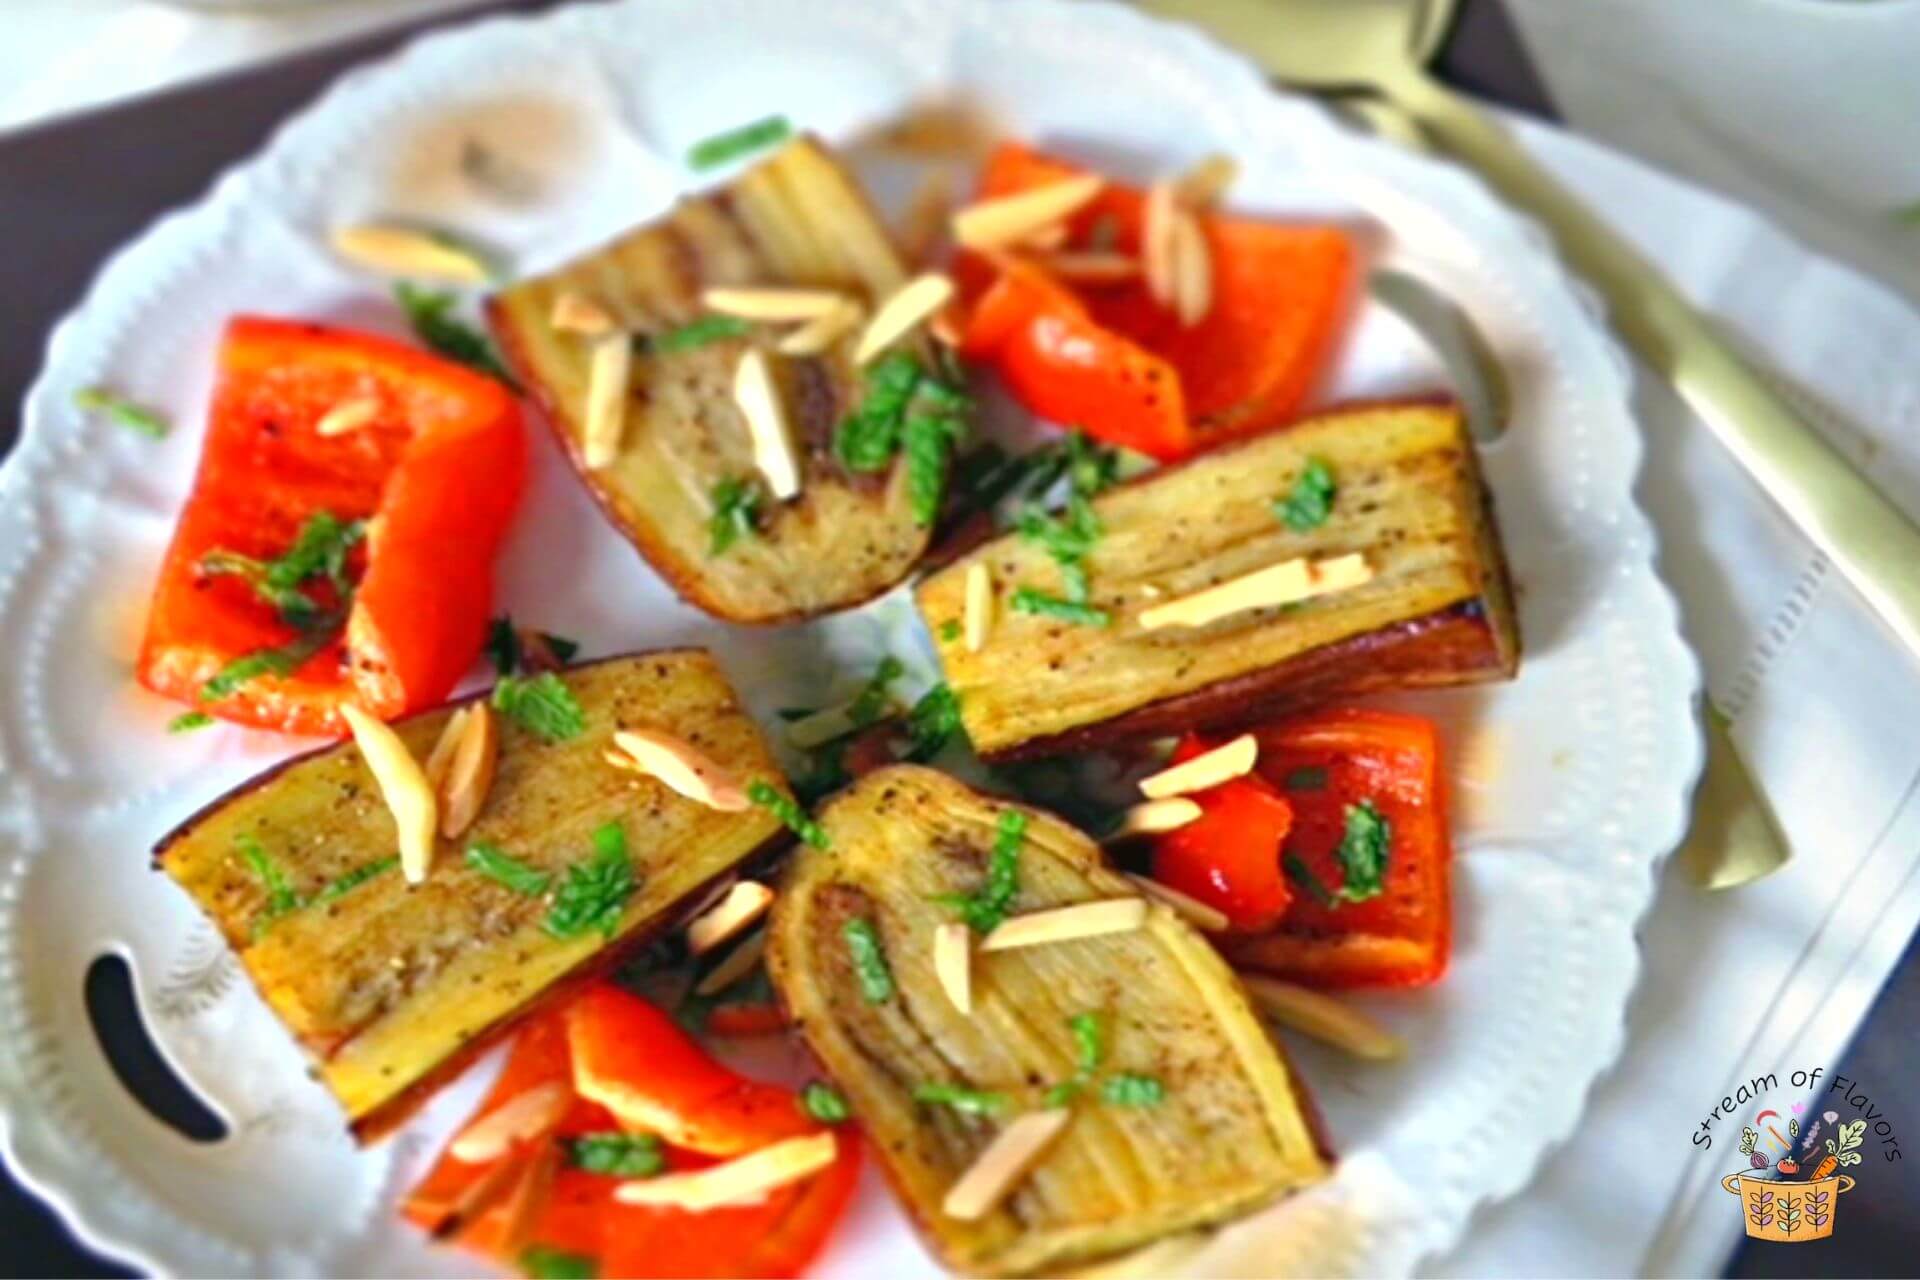 Roasted eggplant and peppers on a plate with almonds